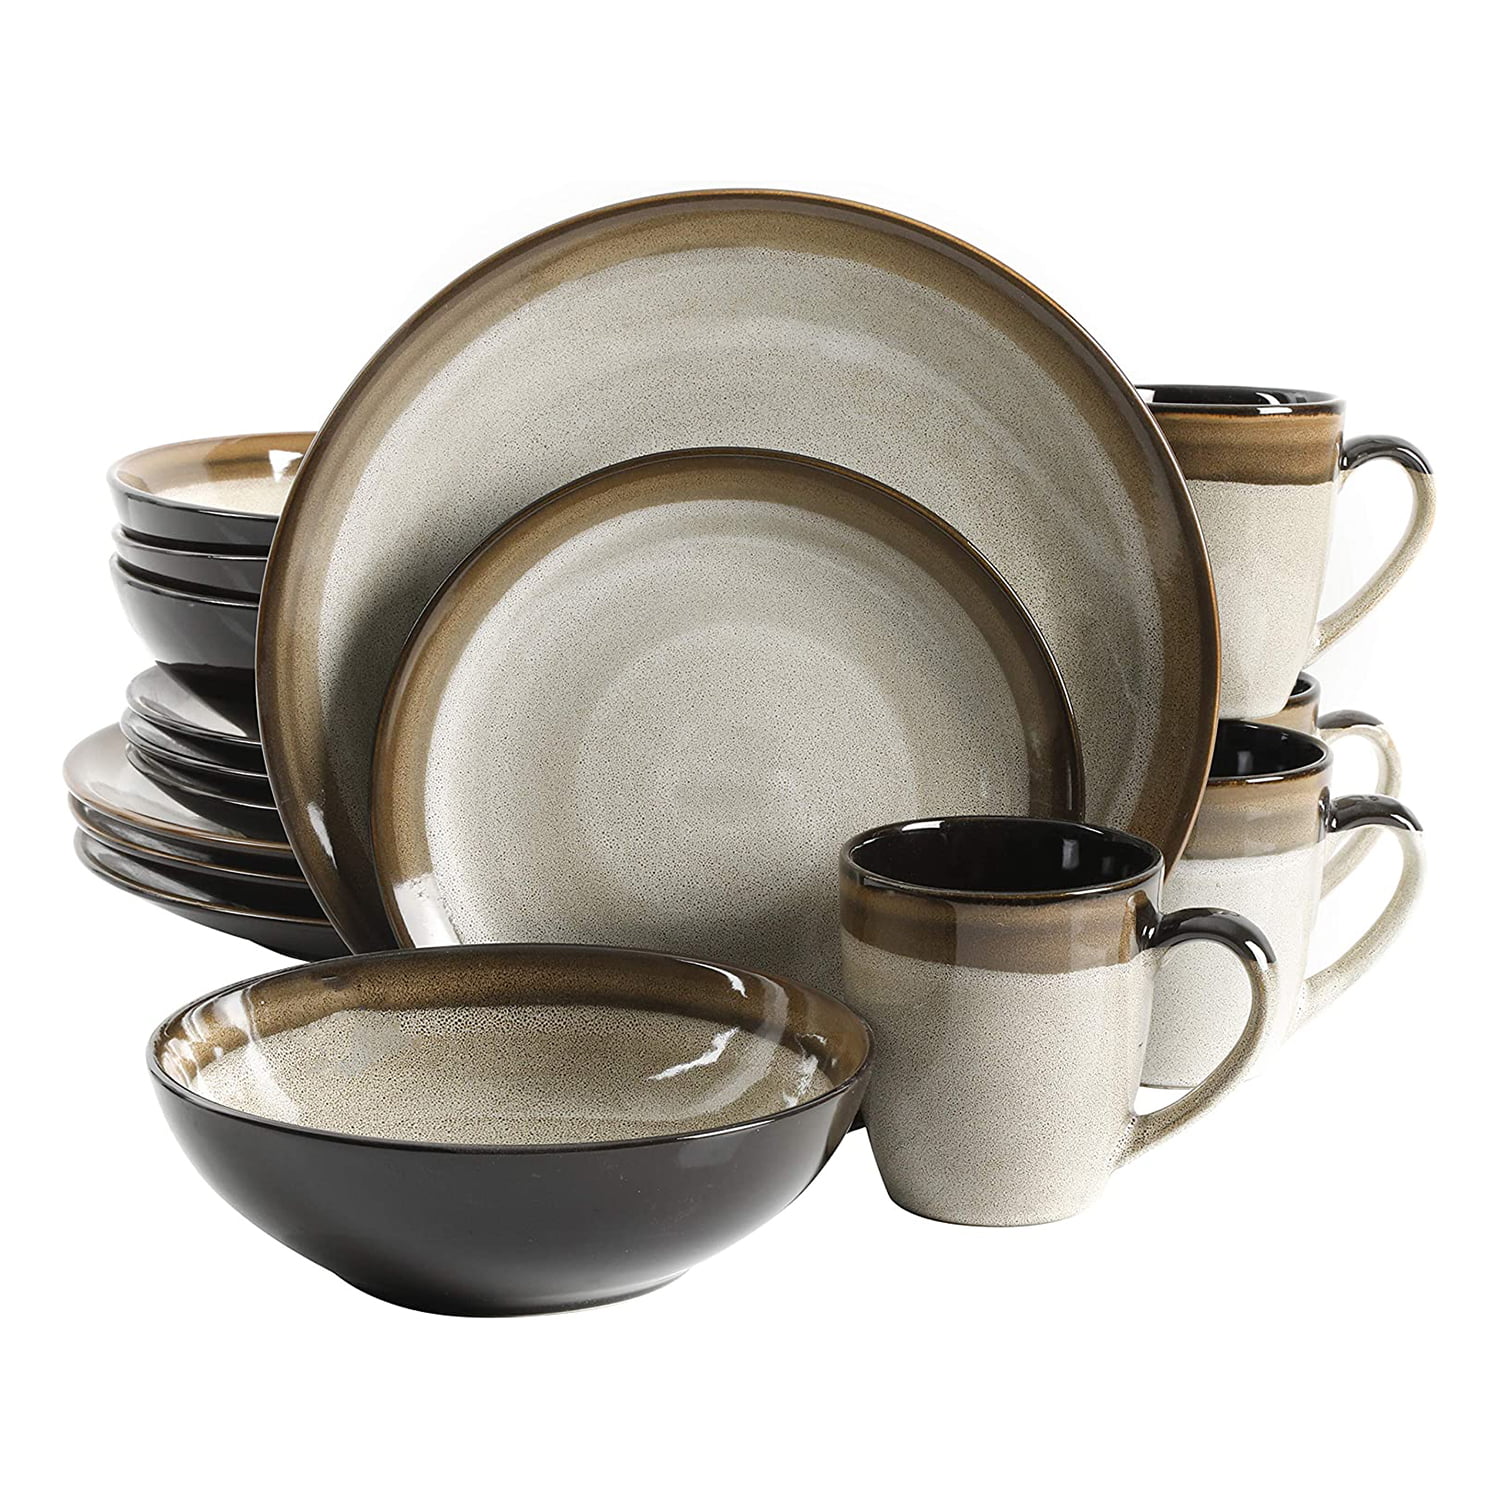 Gibson Elite Couture Bands 16 Piece Dinnerware Plates, Bowls, & Mugs Set,  Brown